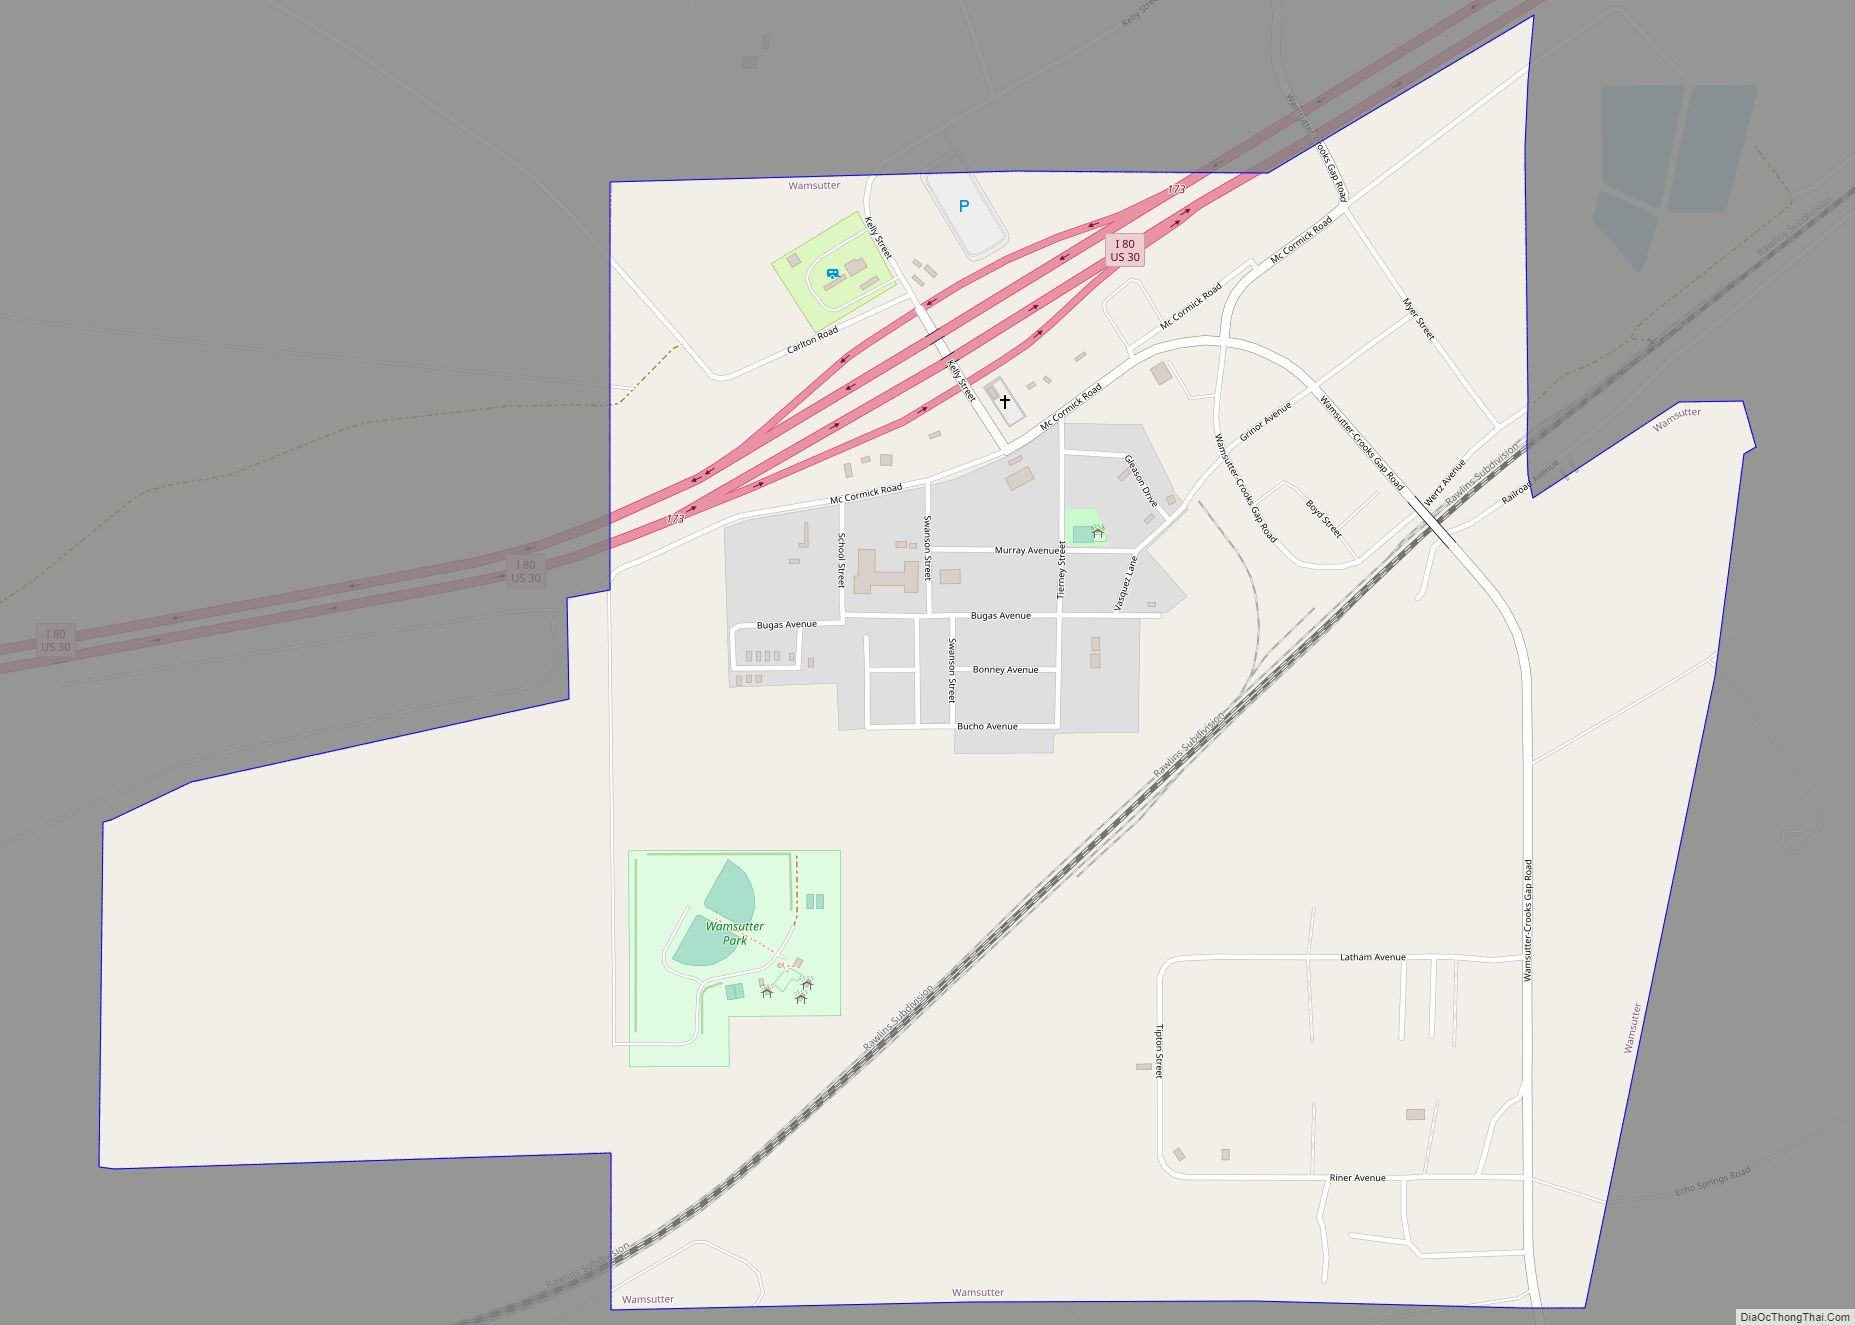 Map of Wamsutter town